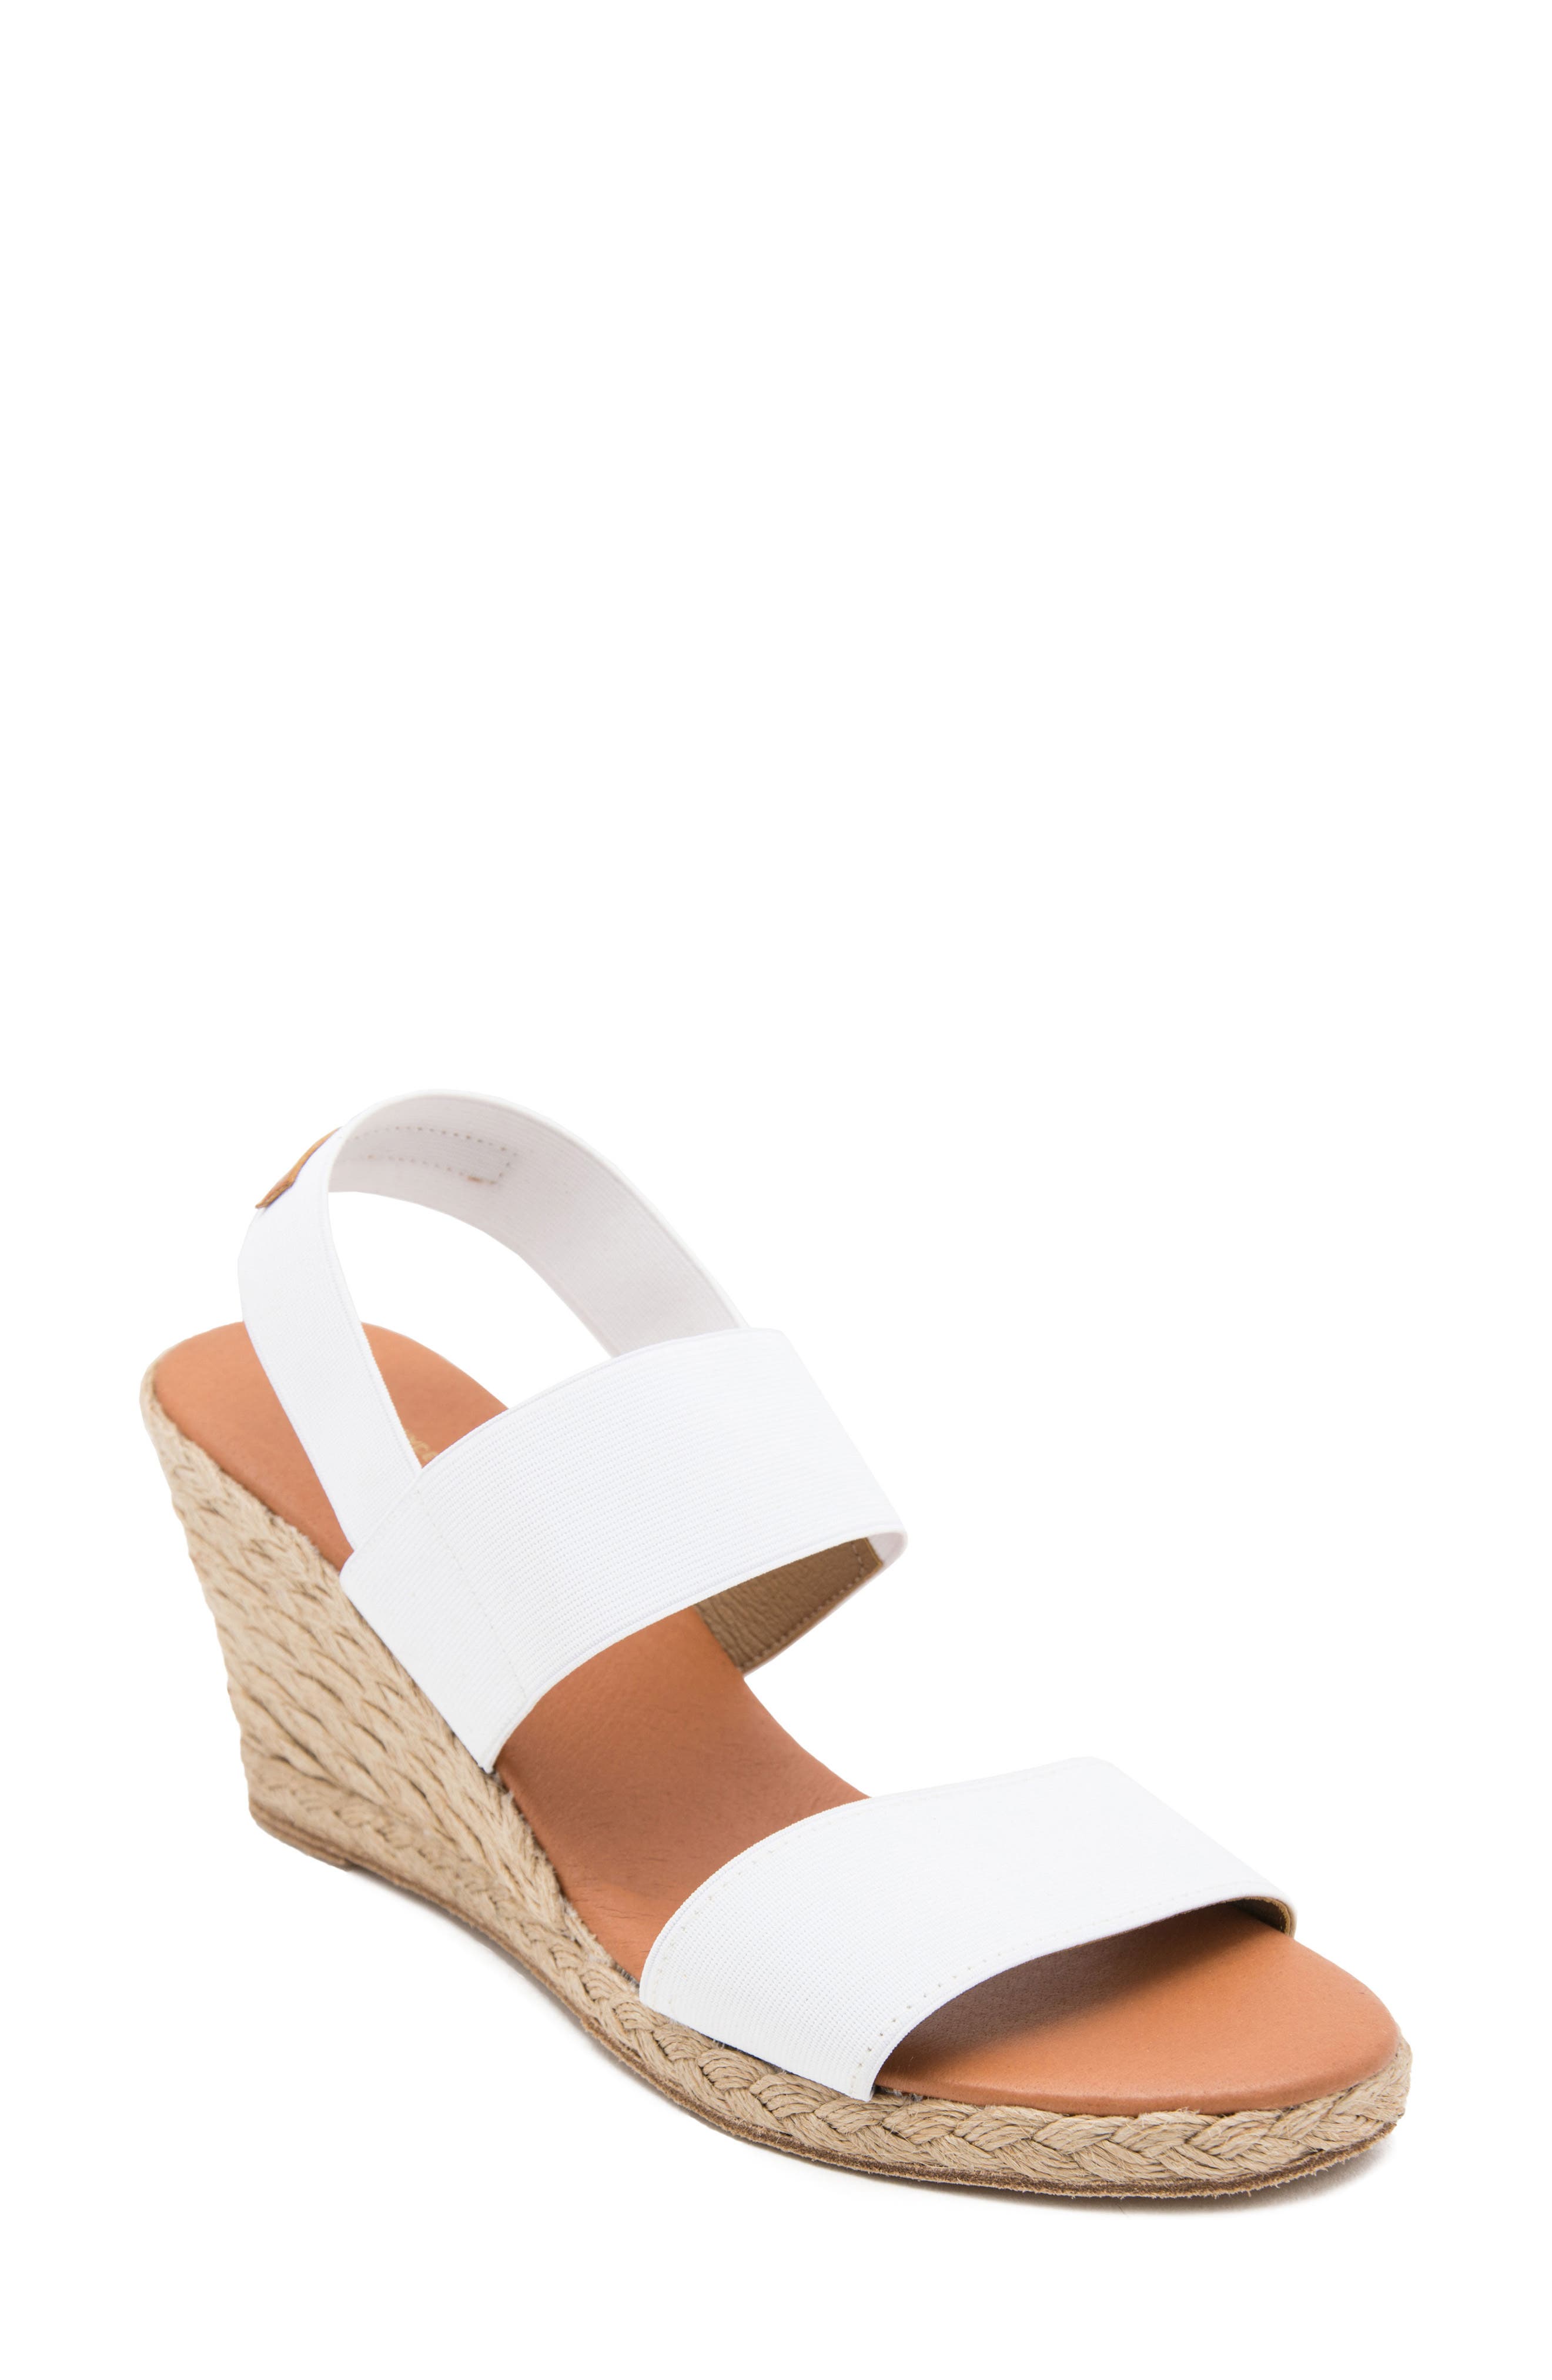 Andre Assous Allison Wedge Sandal in White Fabric